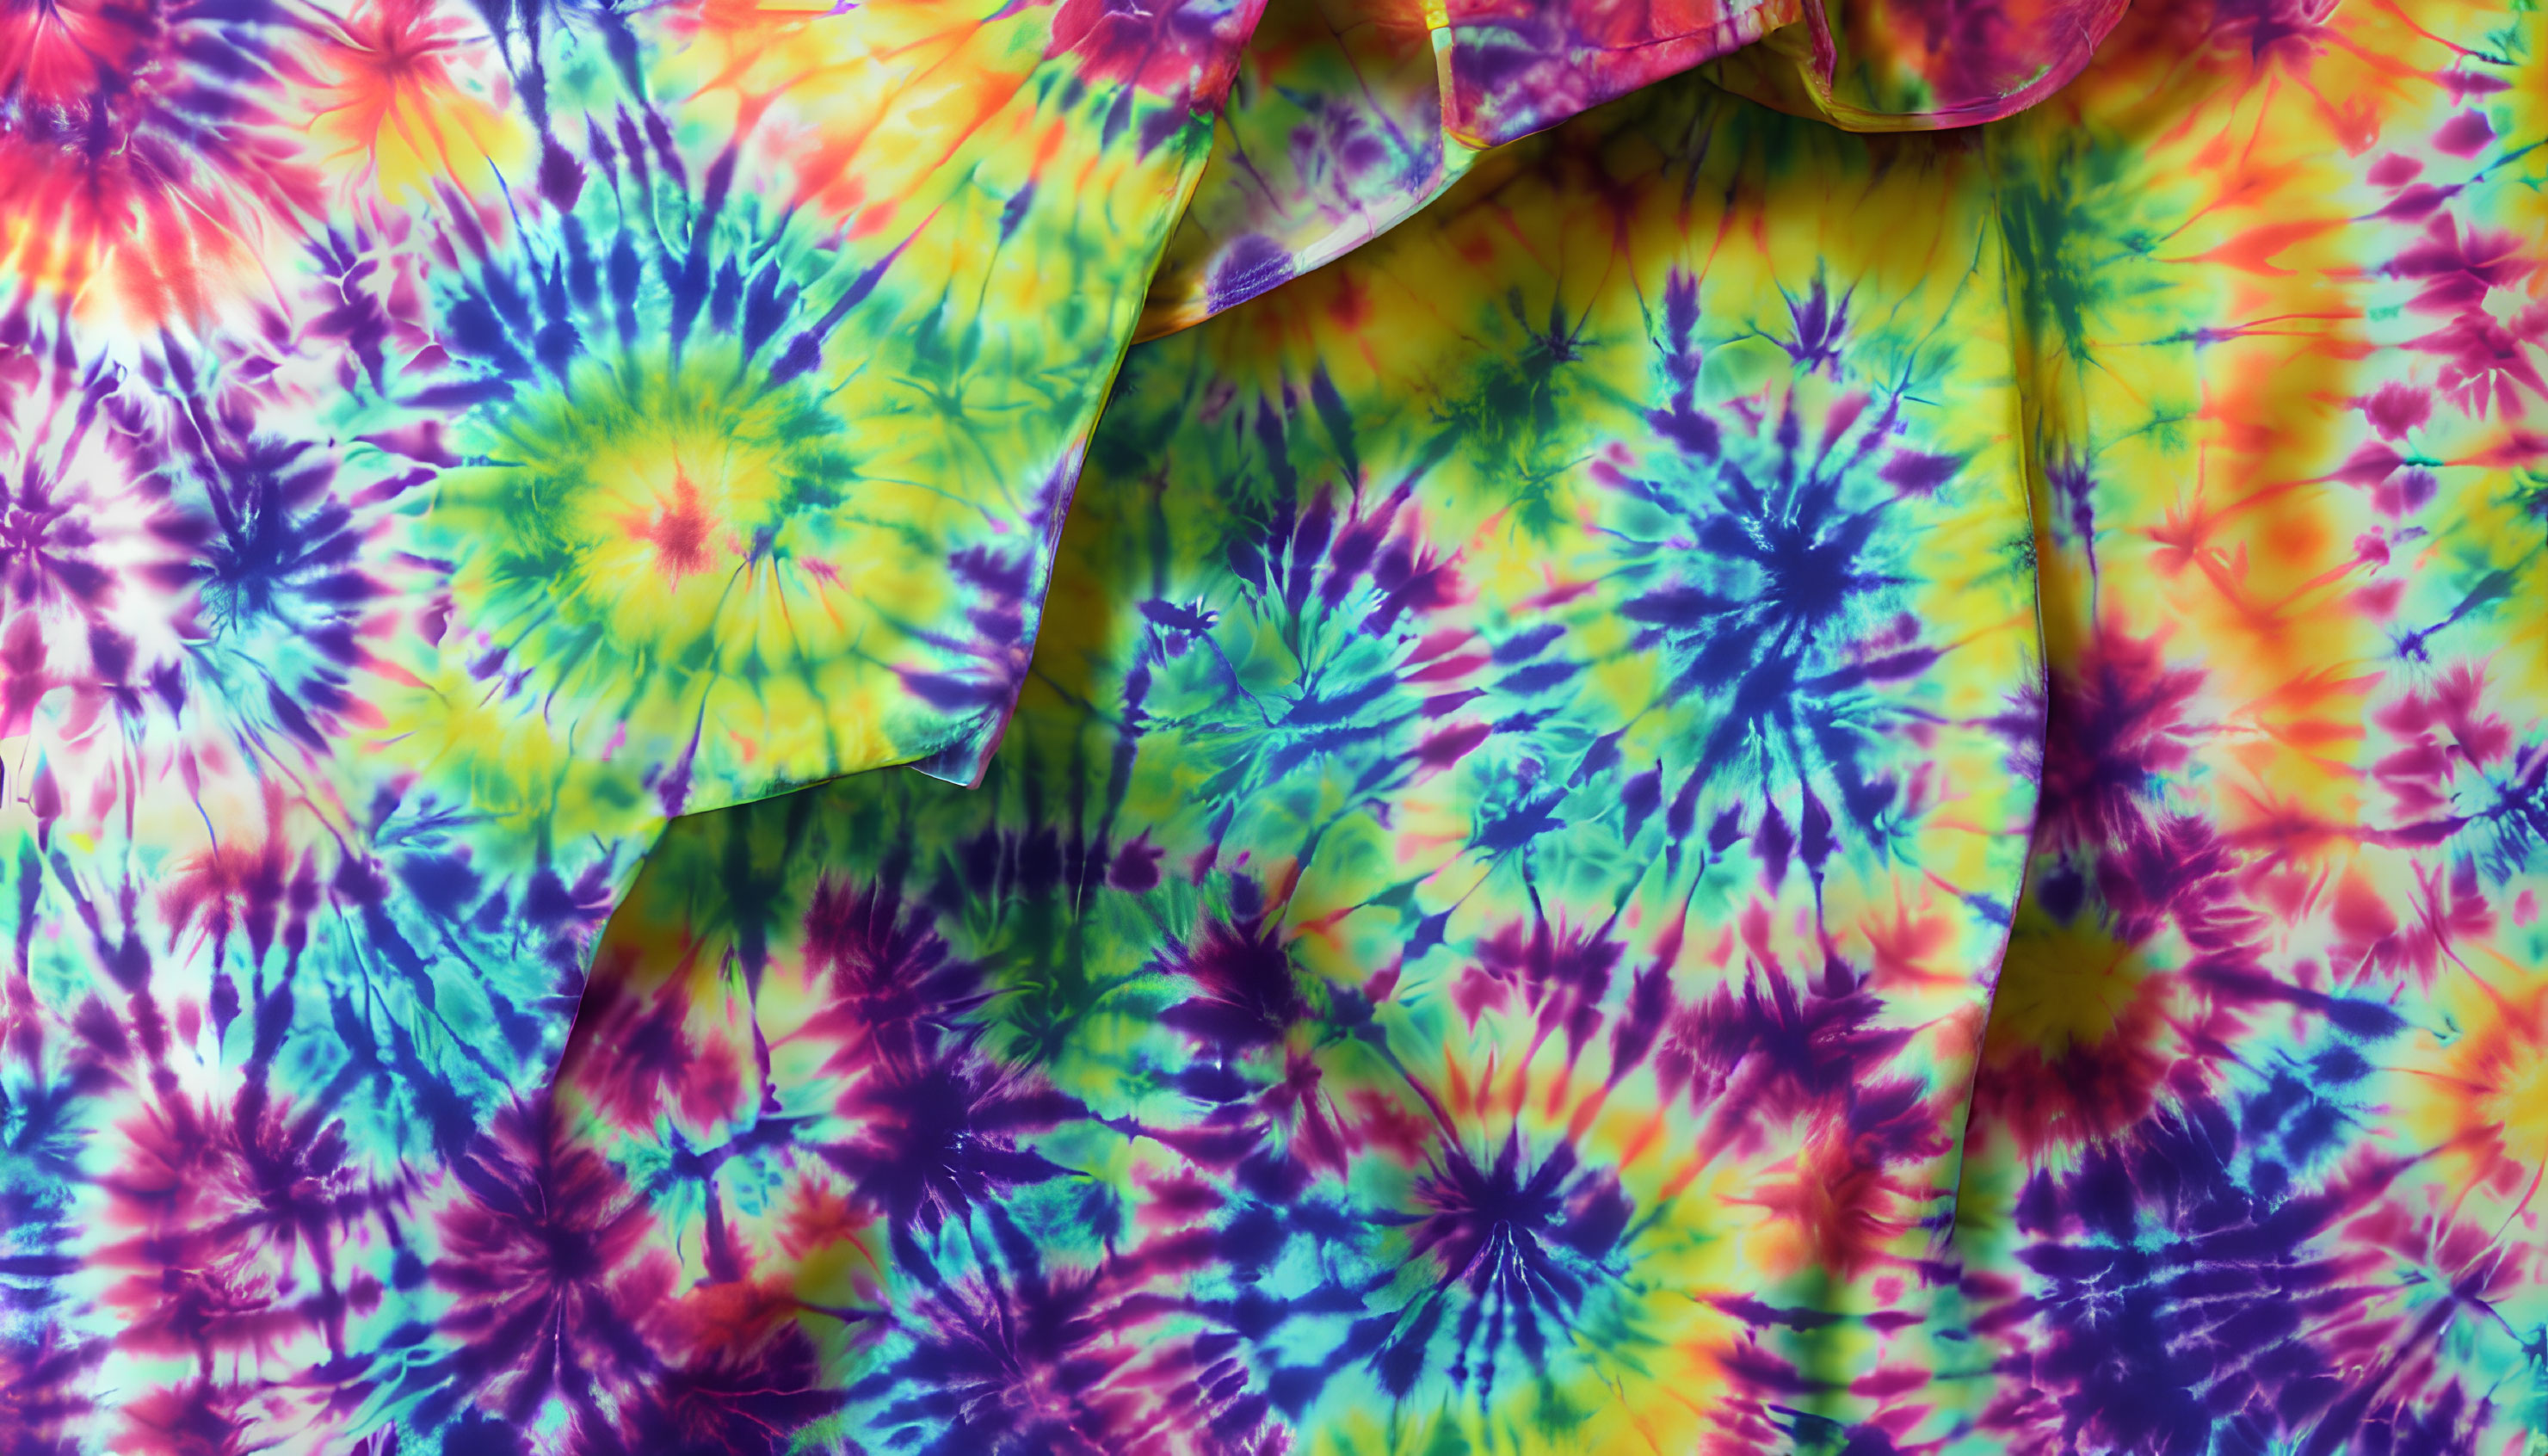 Colorful Tie-Dye Fabric with Circular Patterns in Blue, Green, Yellow, and Pink